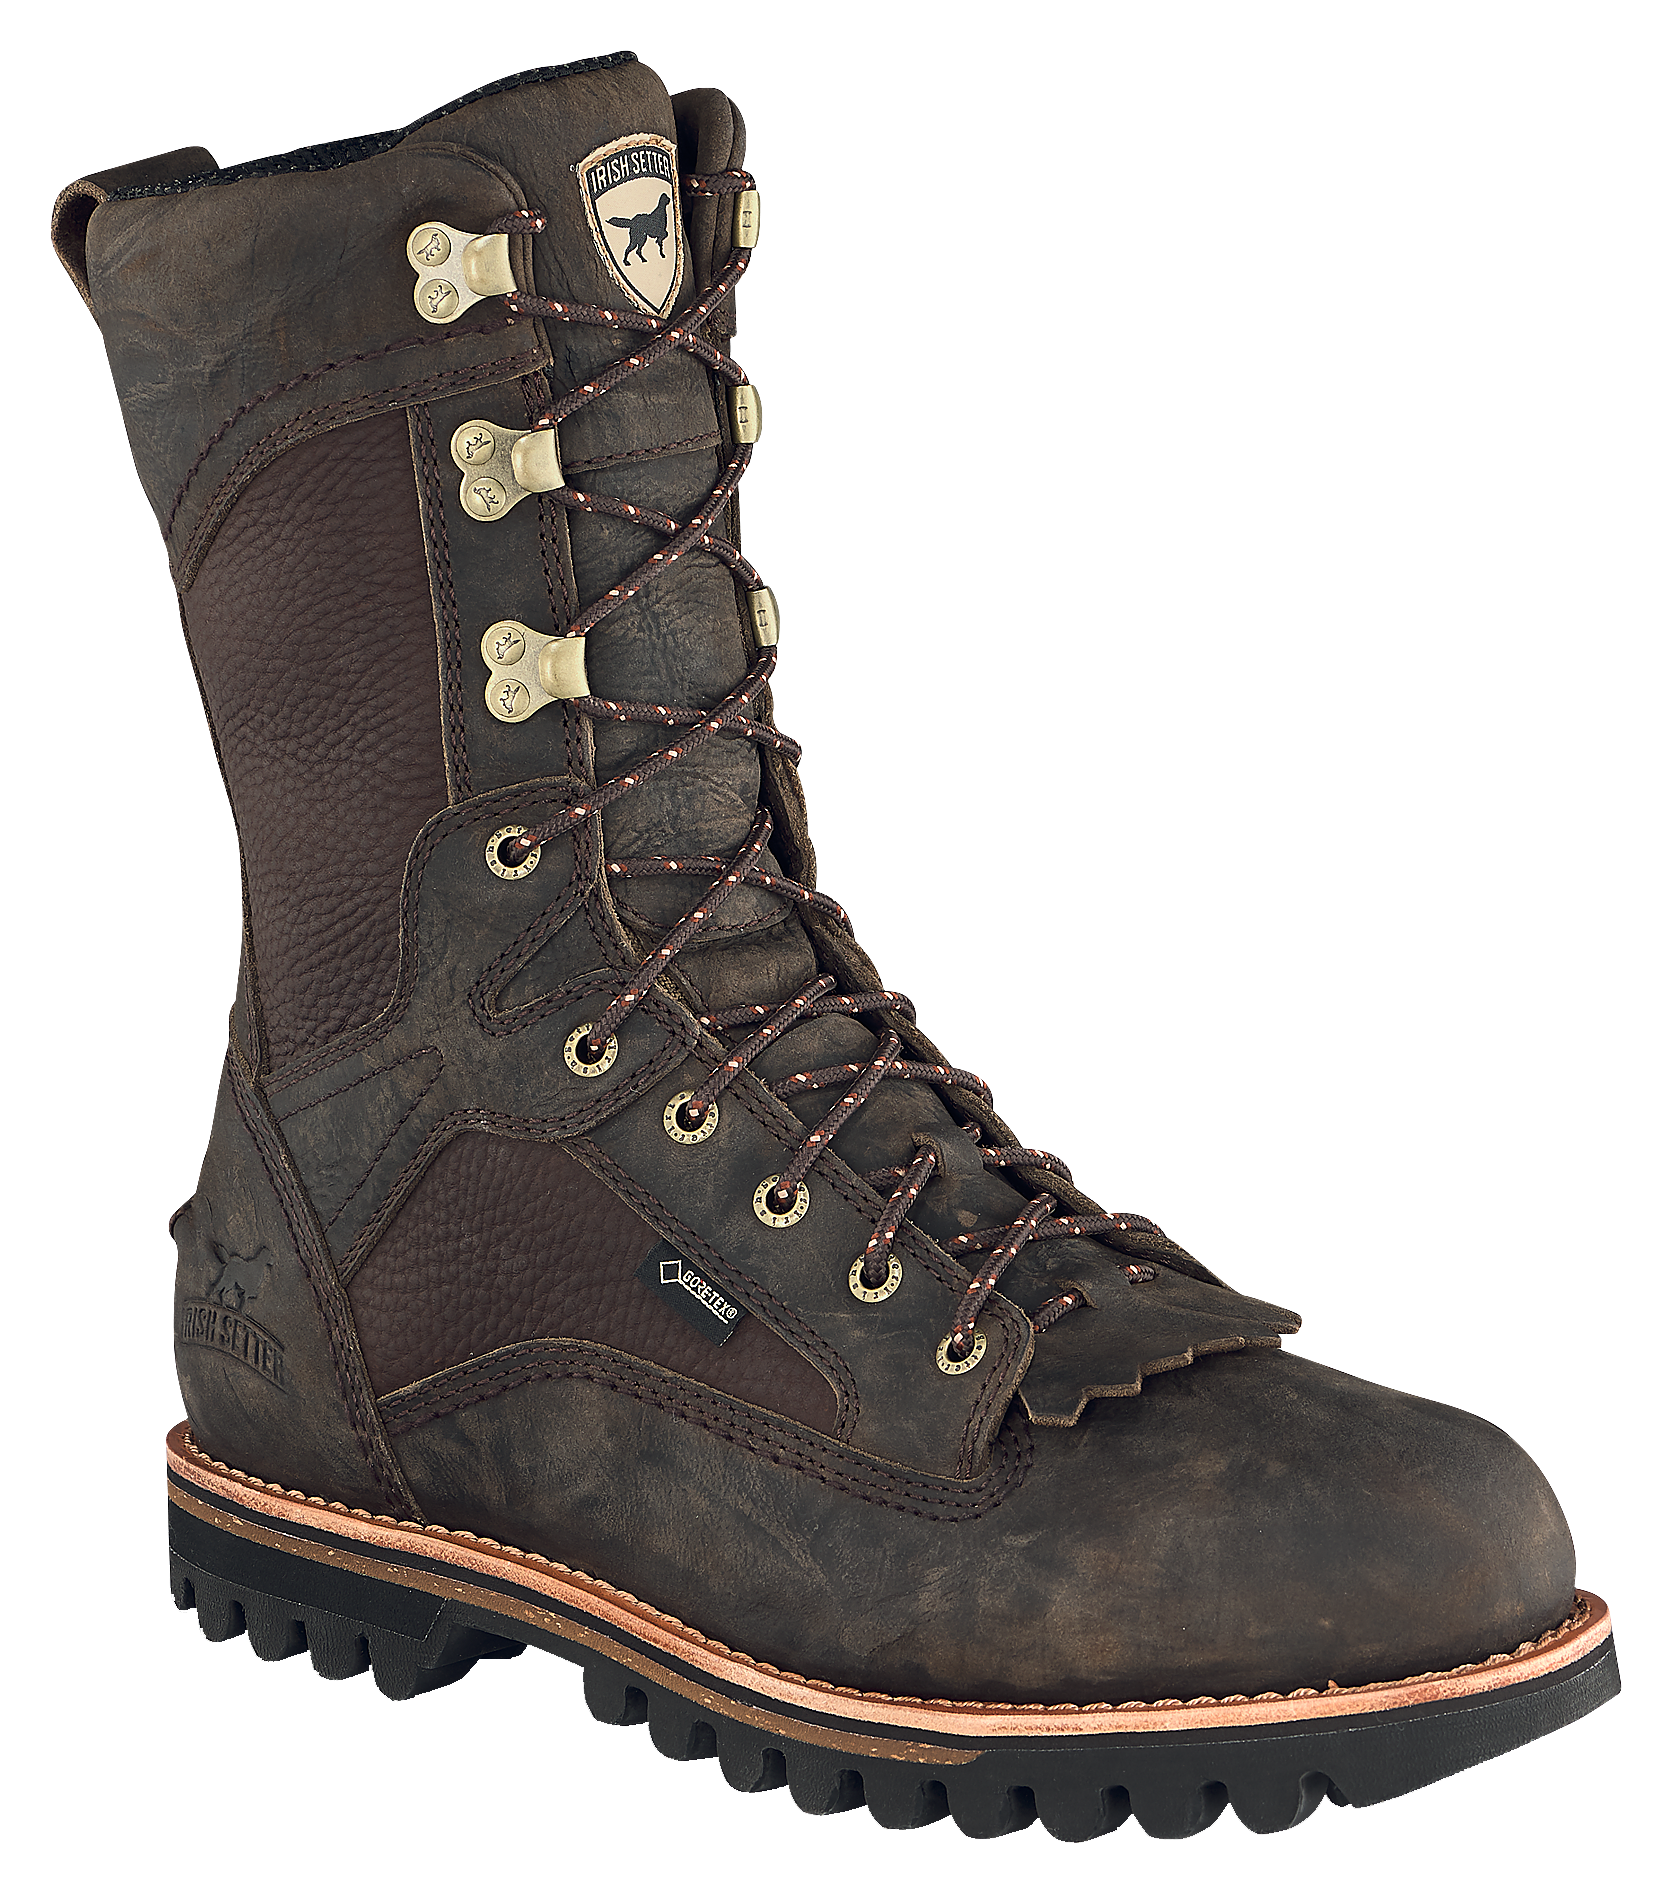 Irish Setter Elk Tracker GORE-TEX Insulated Hunting Boots for Men - Brown - 8.5W